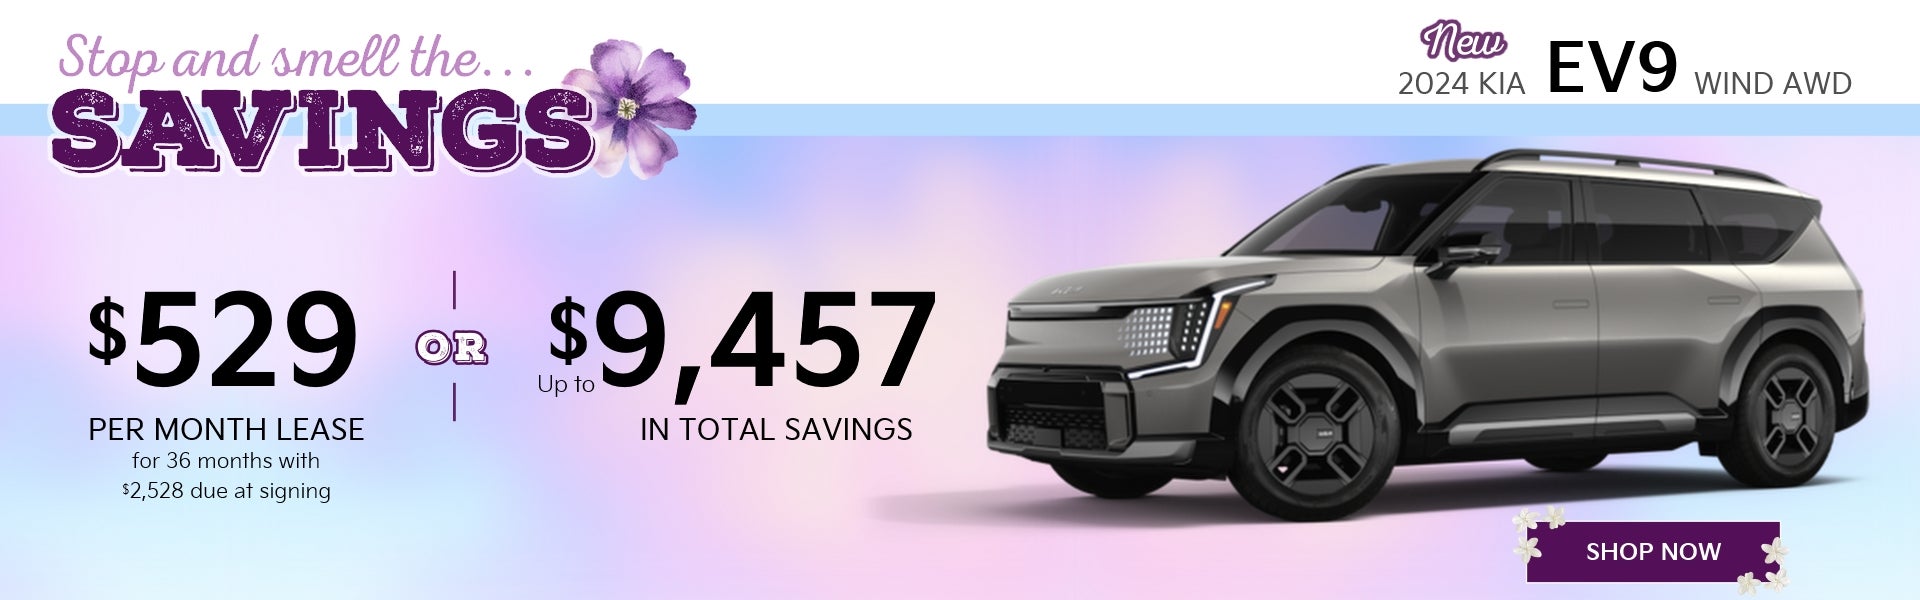 Stop and smell the savings on a new 2024 Kia EV9 Wind AWD!